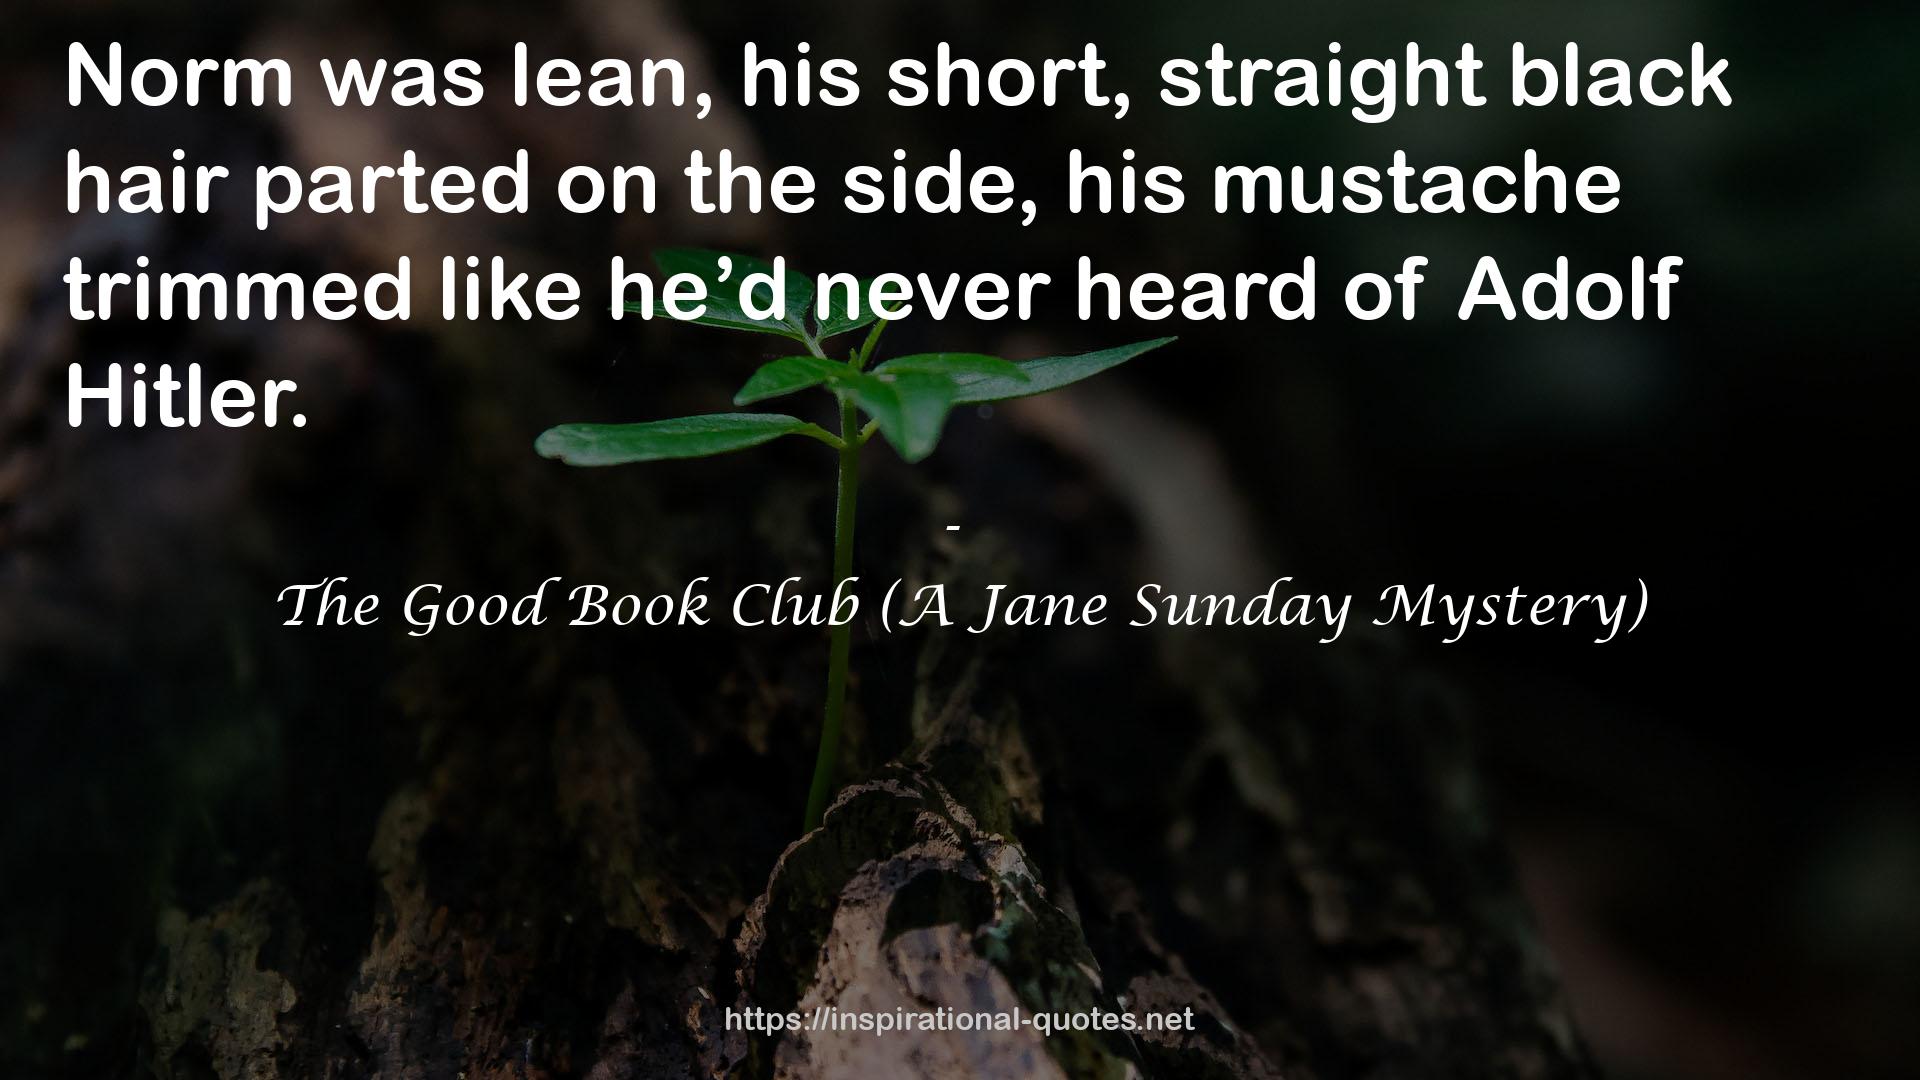 The Good Book Club (A Jane Sunday Mystery) QUOTES